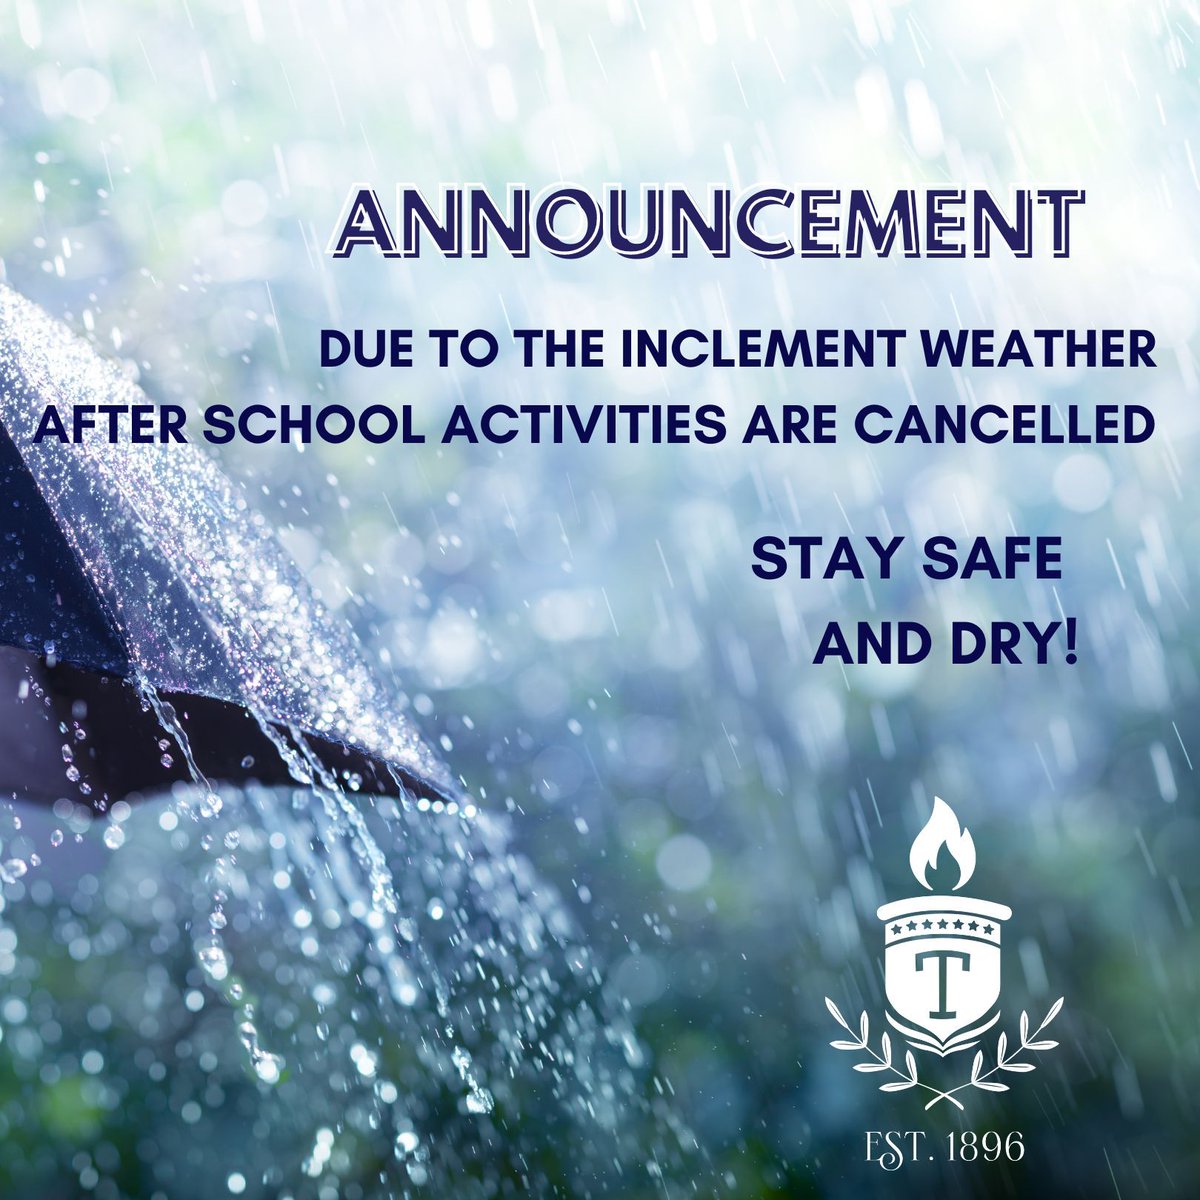 Due to the threat of severe weather Monday afternoon, all after-school events are cancelled. There will be no activities on any school campus Monday, January 8th after 3:00 p.m. This includes all sporting events and/or practices.